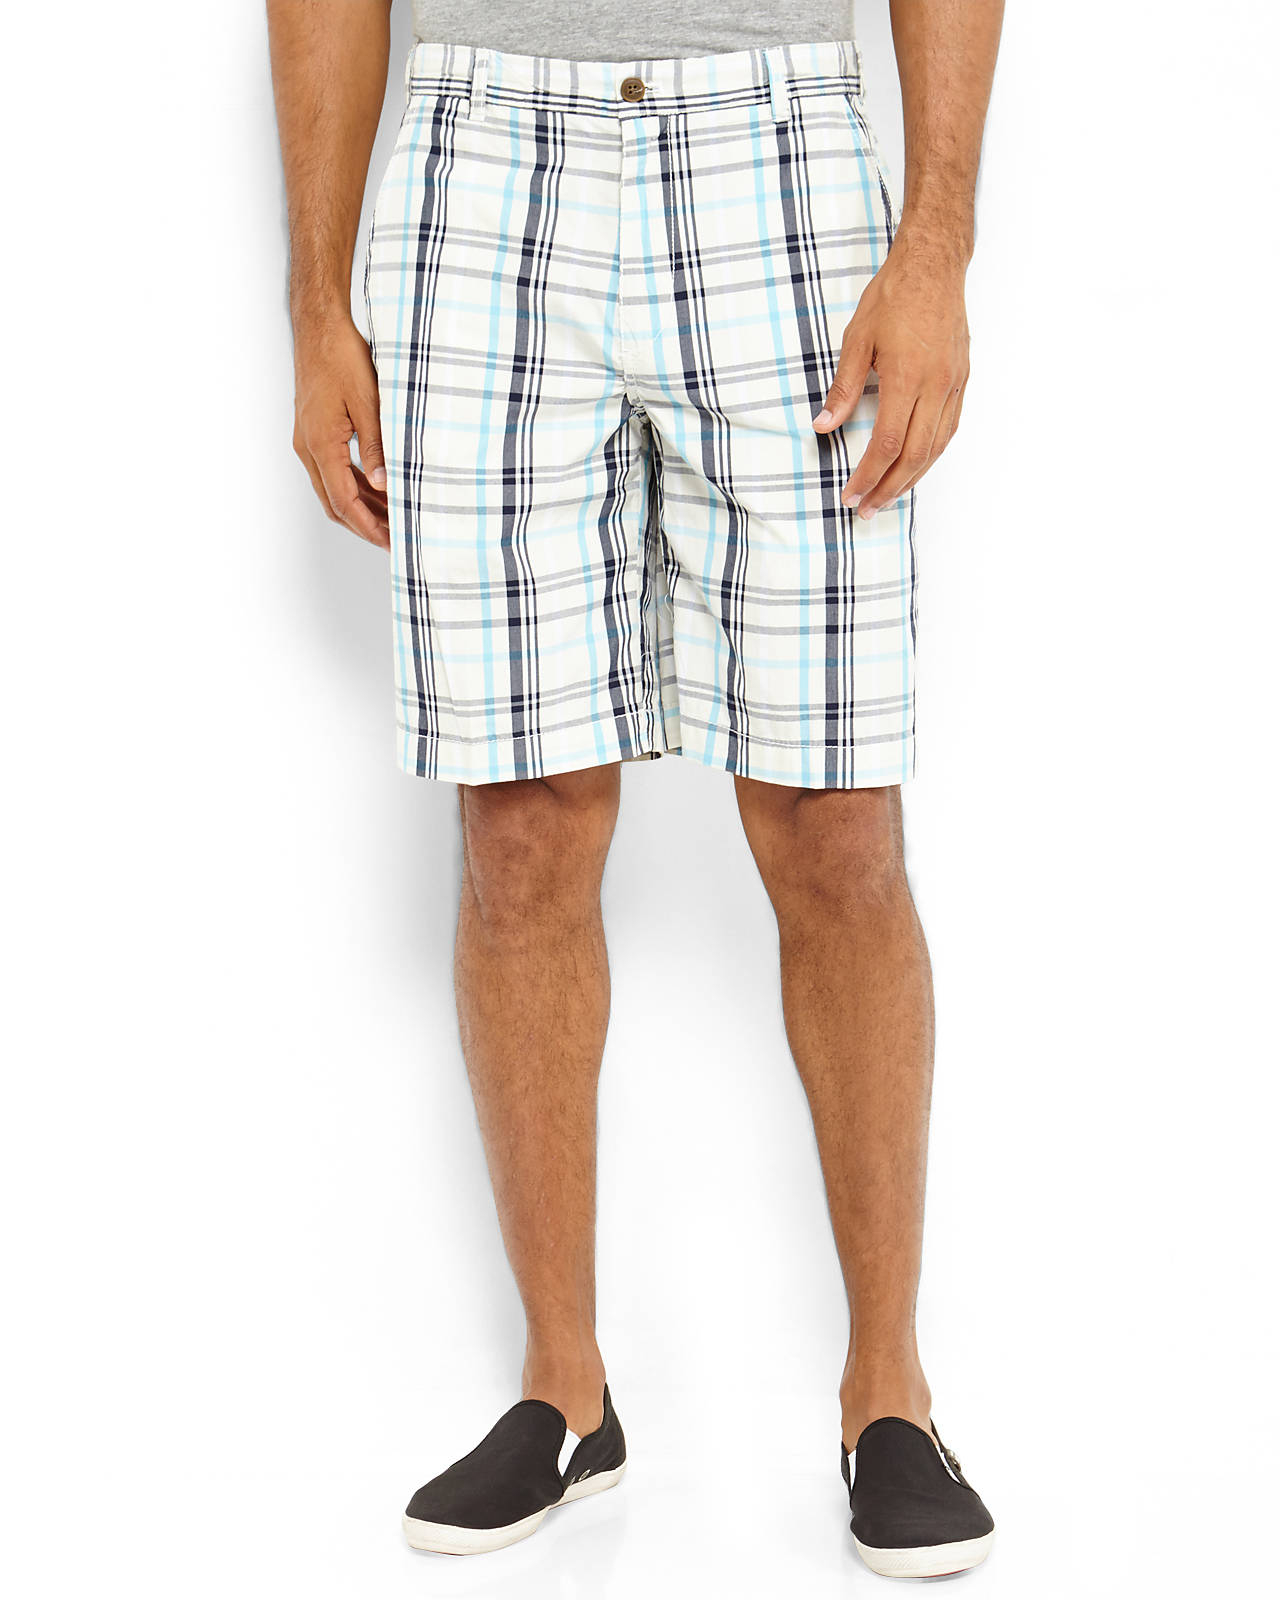 Lyst - Izod Flat Front Plaid Shorts in White for Men